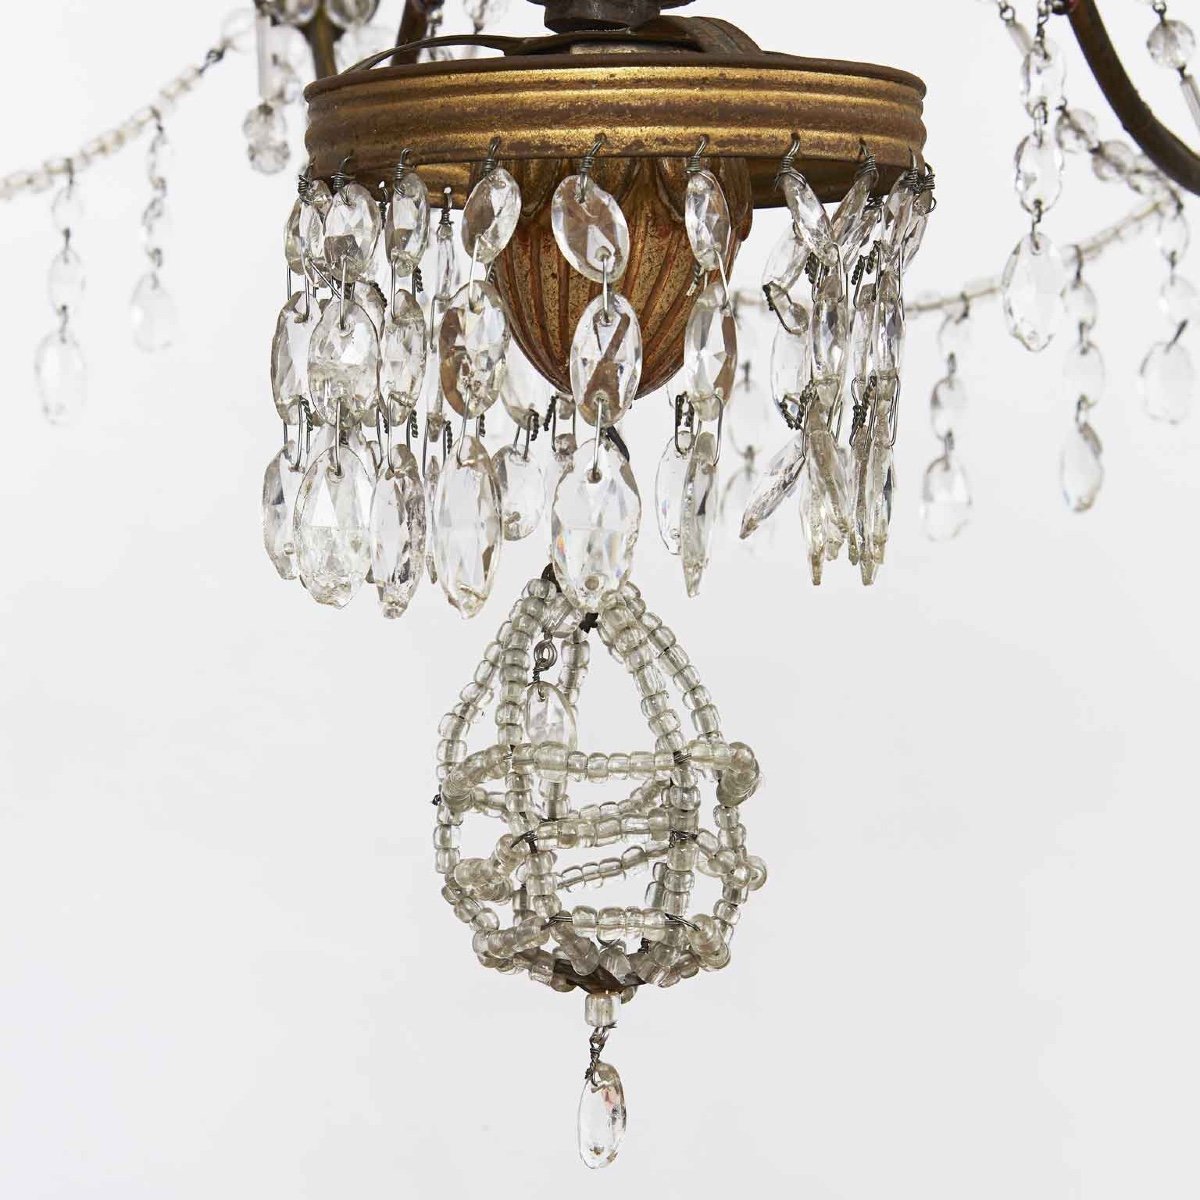 Louis XVI Genoese Chandelier In Gilded Wood And Crystals End 1700 Eight Lights -photo-2